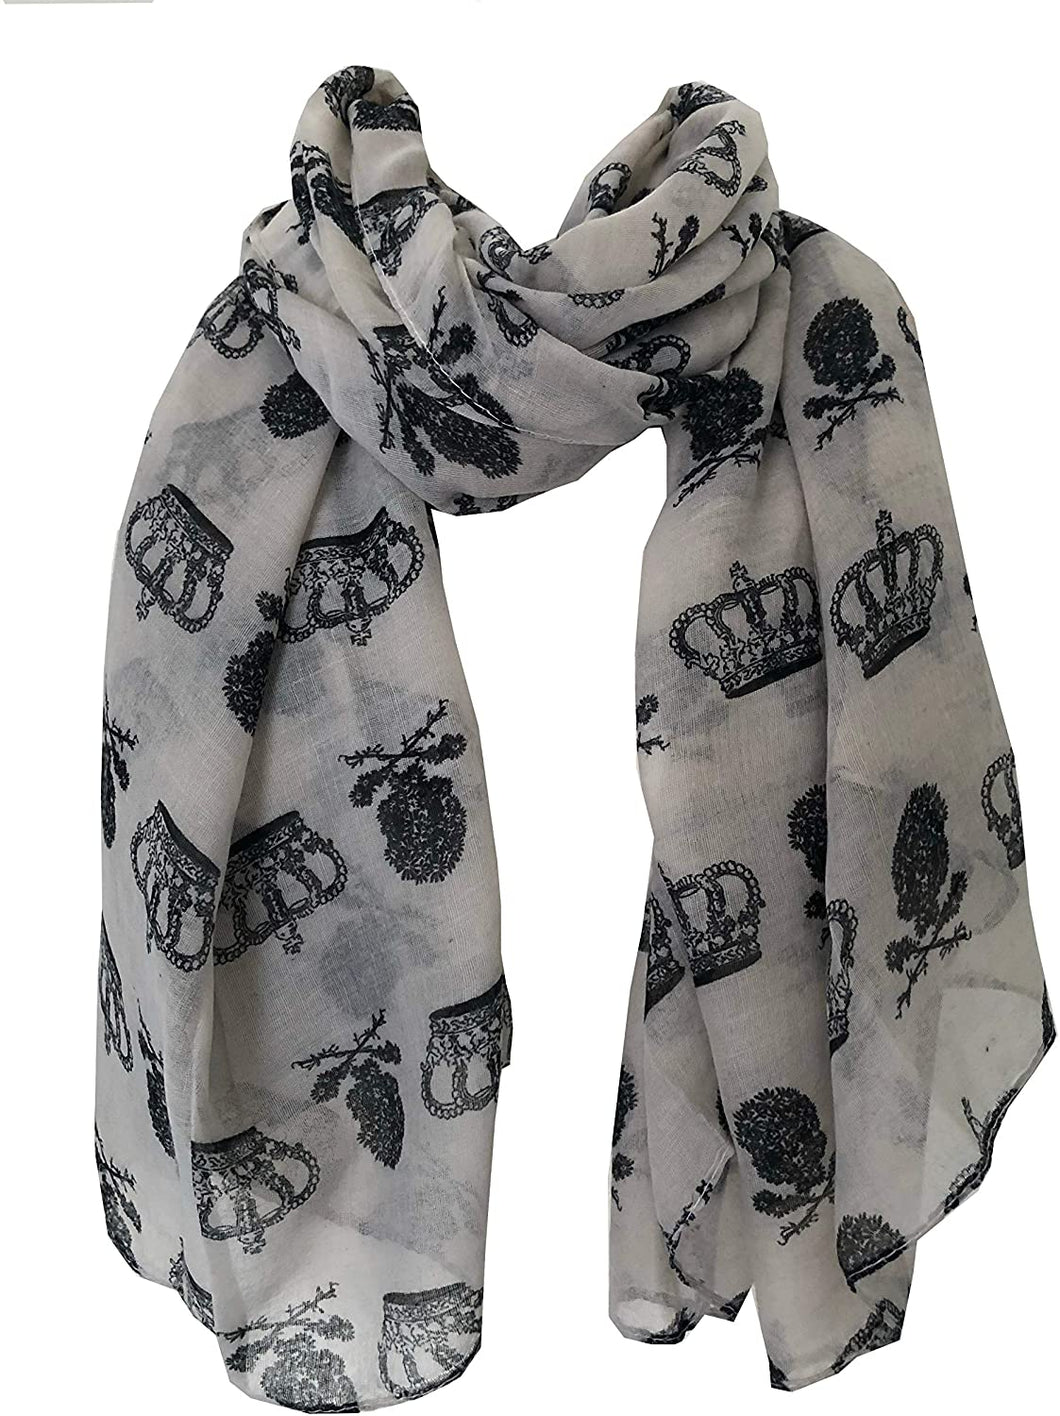 Pamper Yourself Now Beige with Black Skull and Crown Design Scarf/wrap